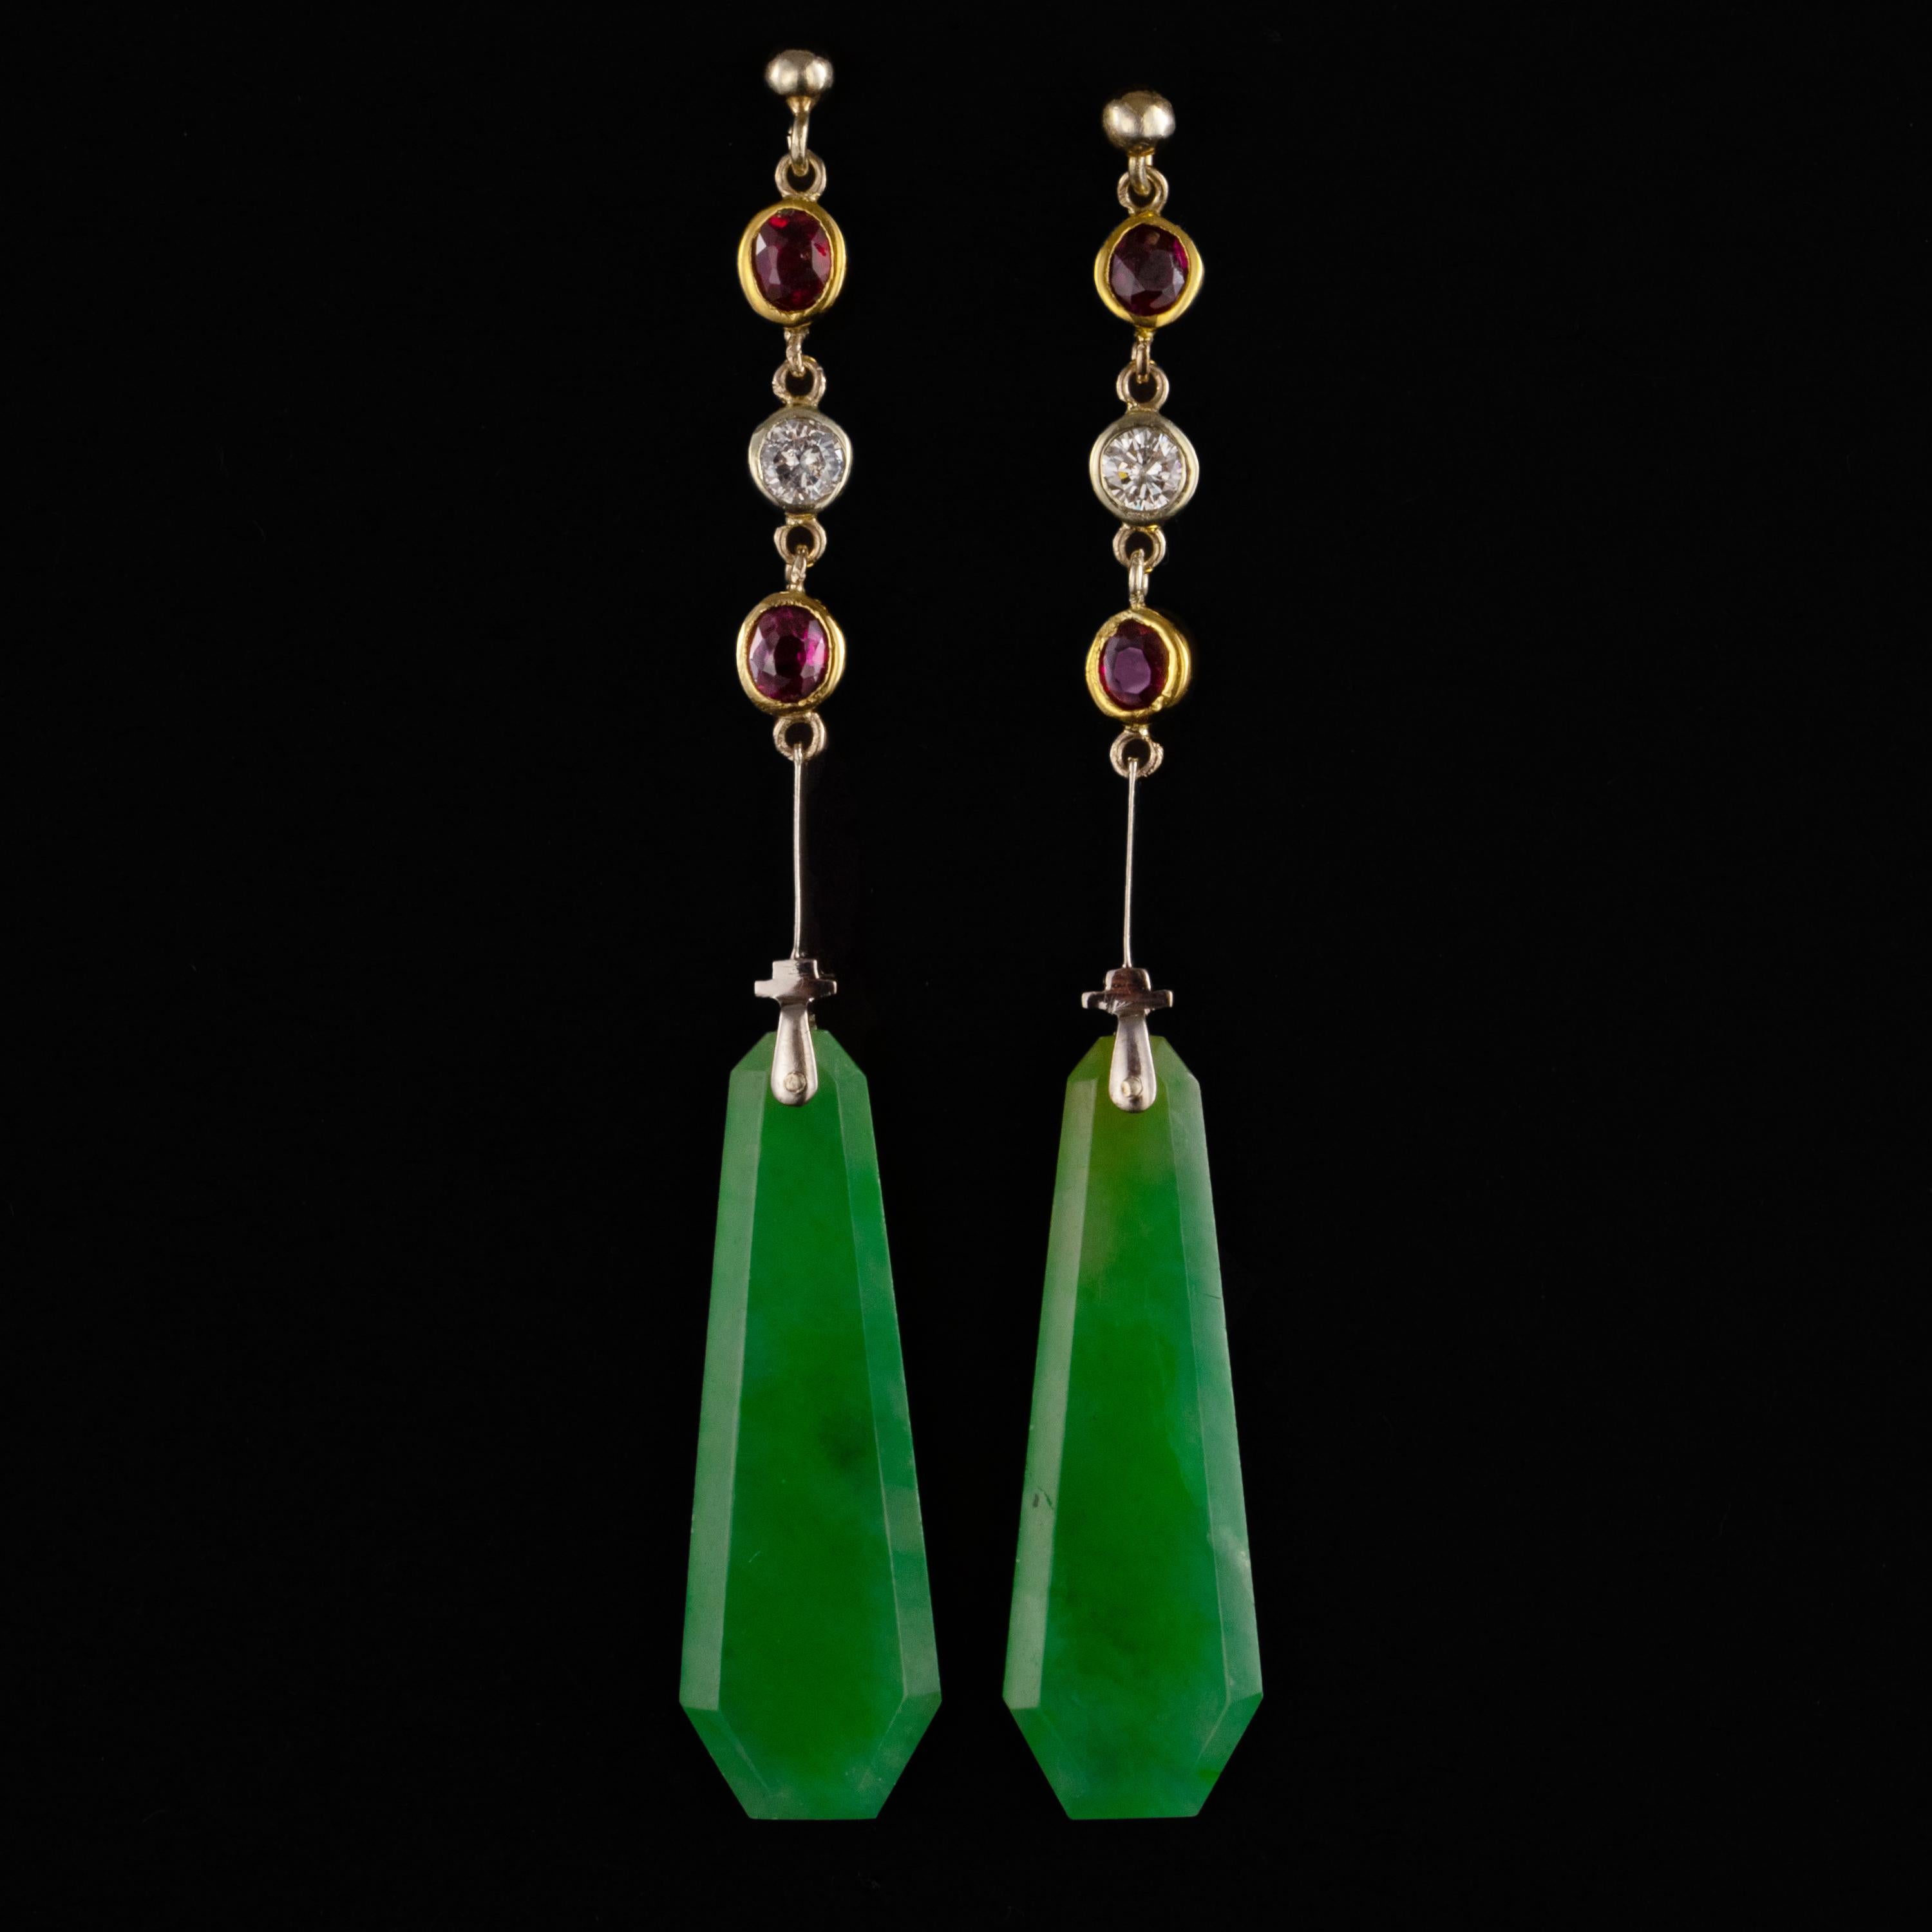 This pair of Art Deco jade, spinel & diamond drop earrings exemplify the very best of sleek, geometric Art Deco design. Entirely hand-crafted in the 1920s from 18K yellow gold and platinum, the earrings measure 66.77mm in length. Each 2.89mm thick